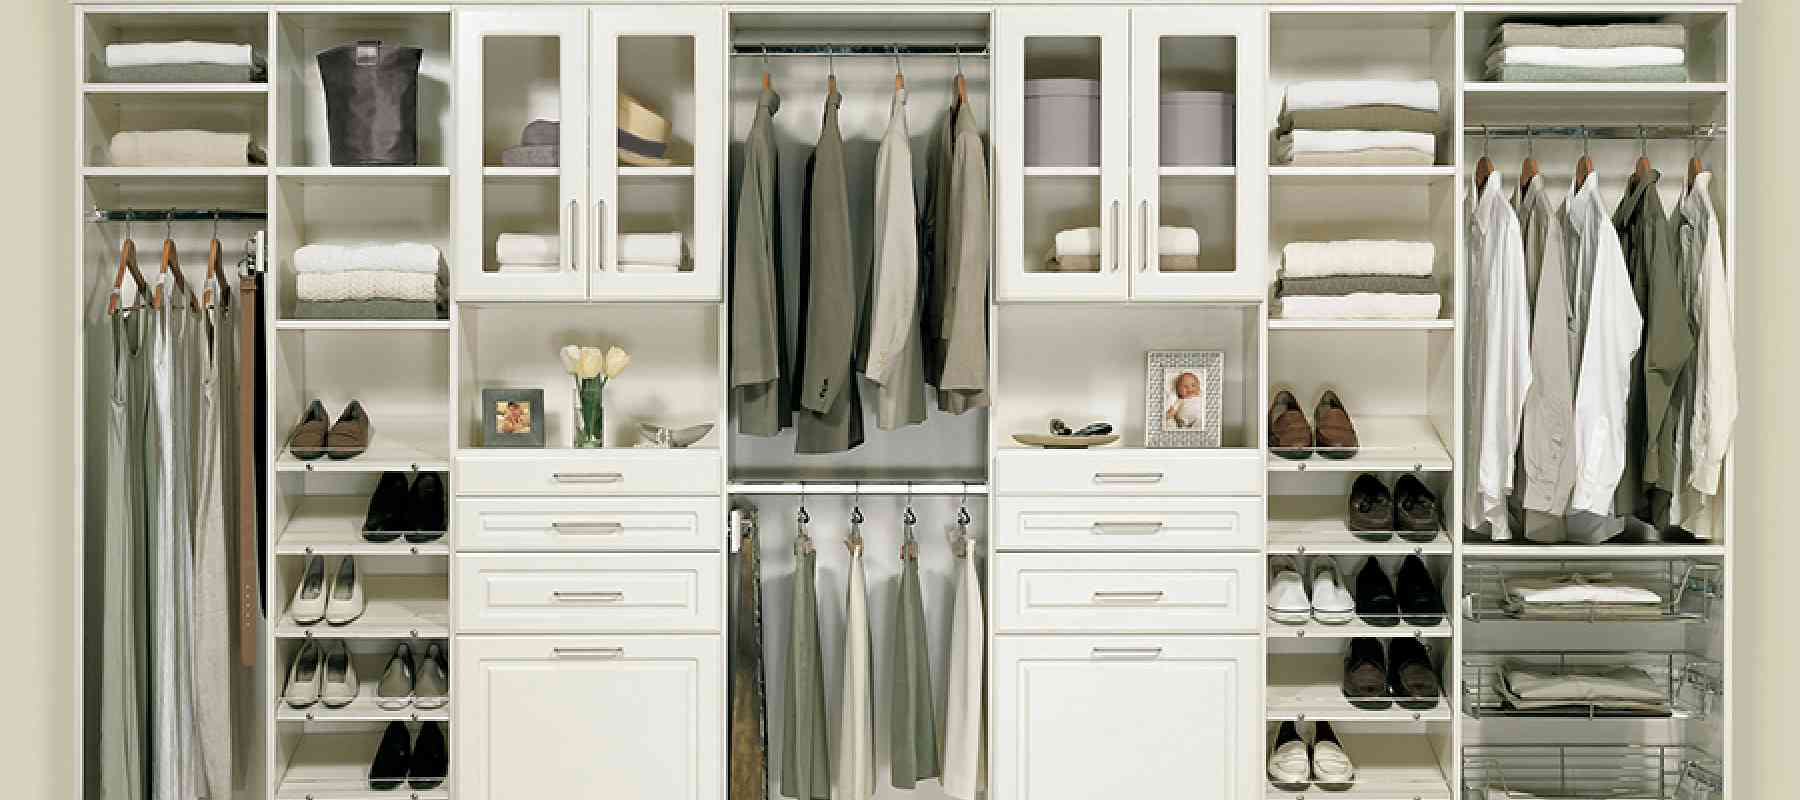 Add Functionality to Your Reach-in Closet